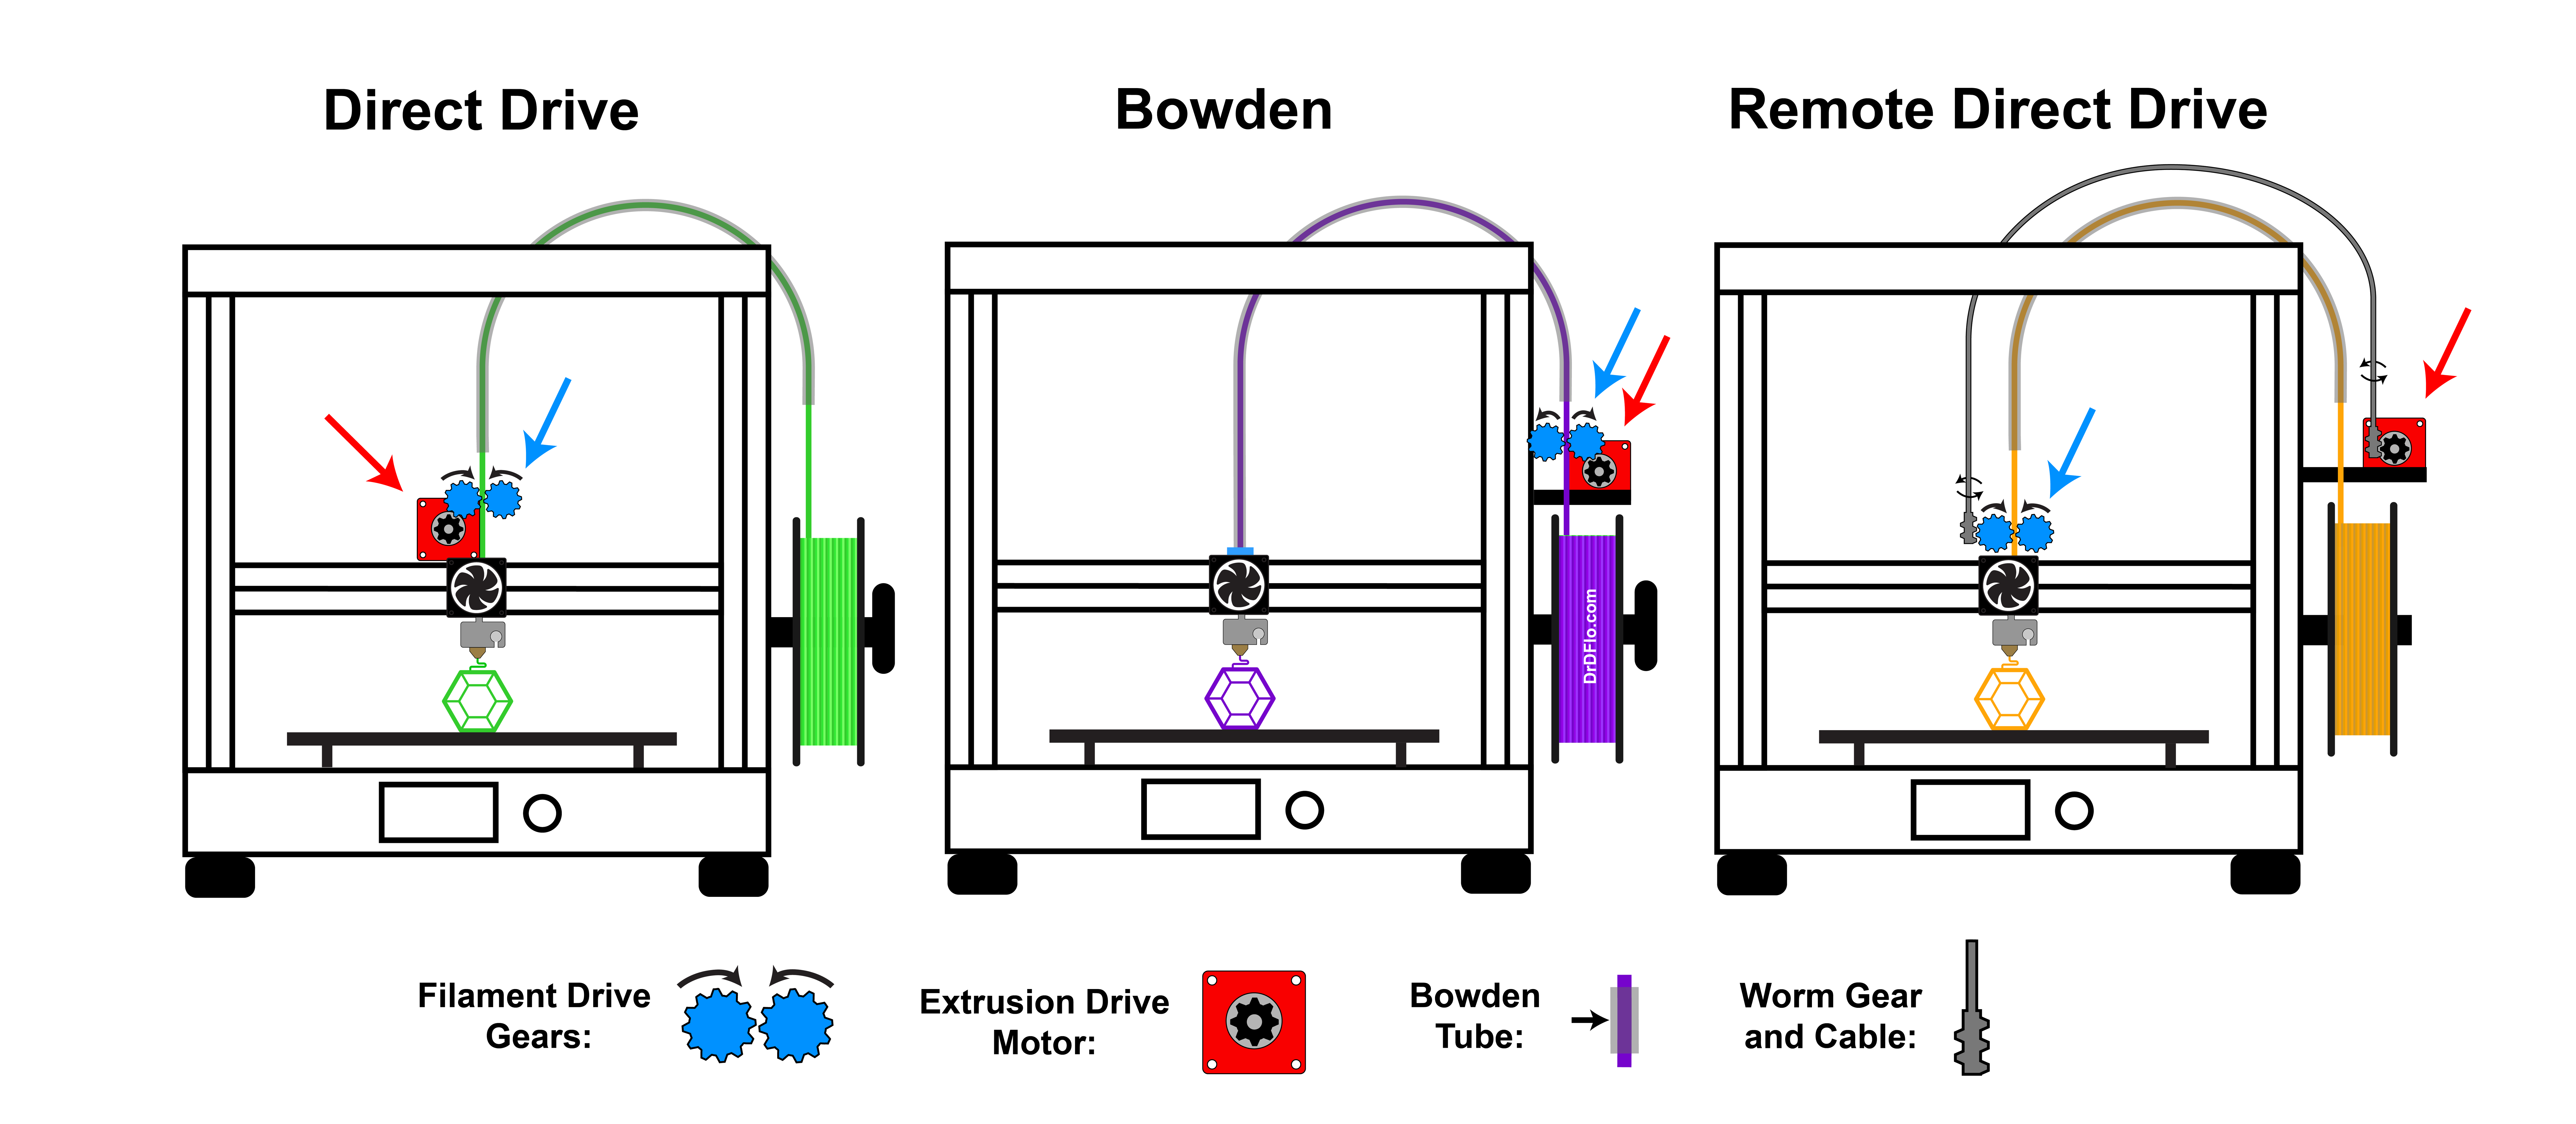 3D Printer extruder setups, including direct drive, Bowden, and remote direct drive or hybrid.